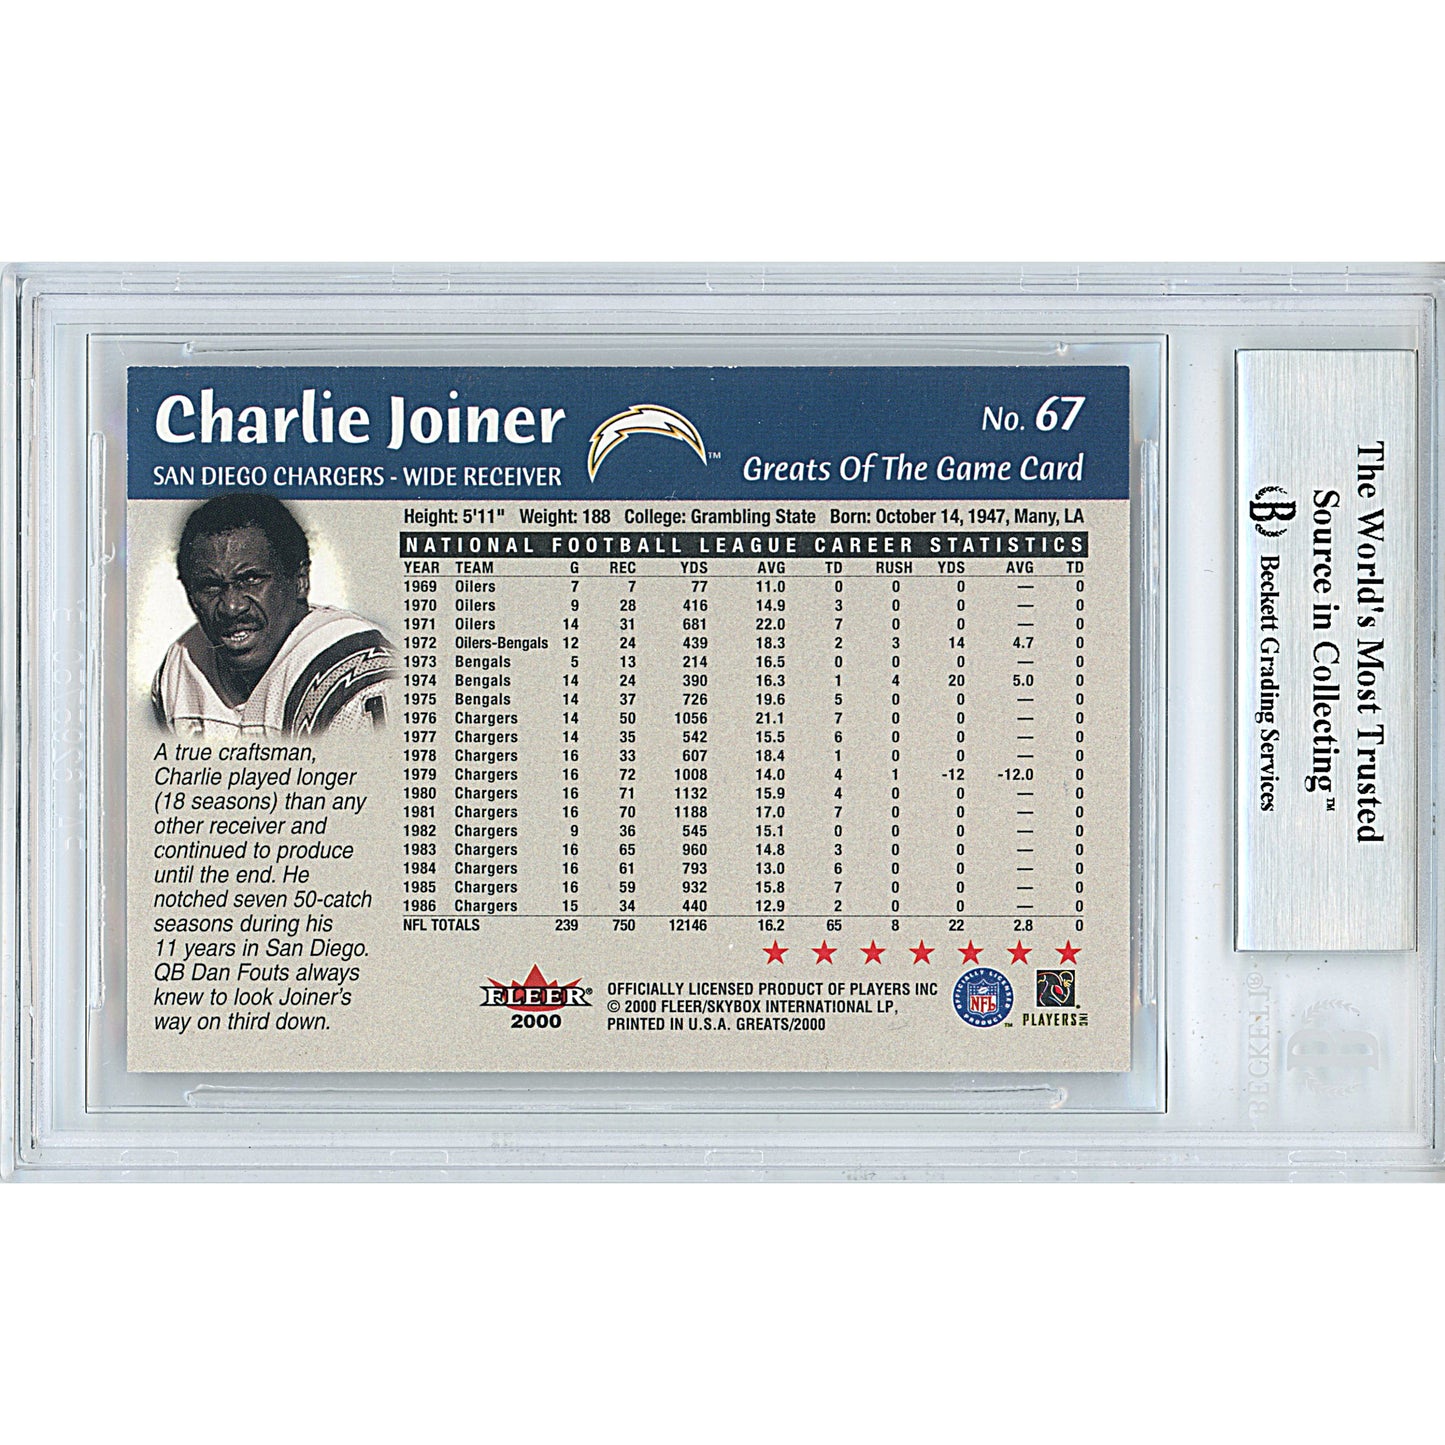 Footballs- Autographed- Charlie Joiner Signed San Diego Chargers 2000 Fleer Greats of the Game Football Card Beckett BAS Authenticated Slabbed 00013247912 - 102